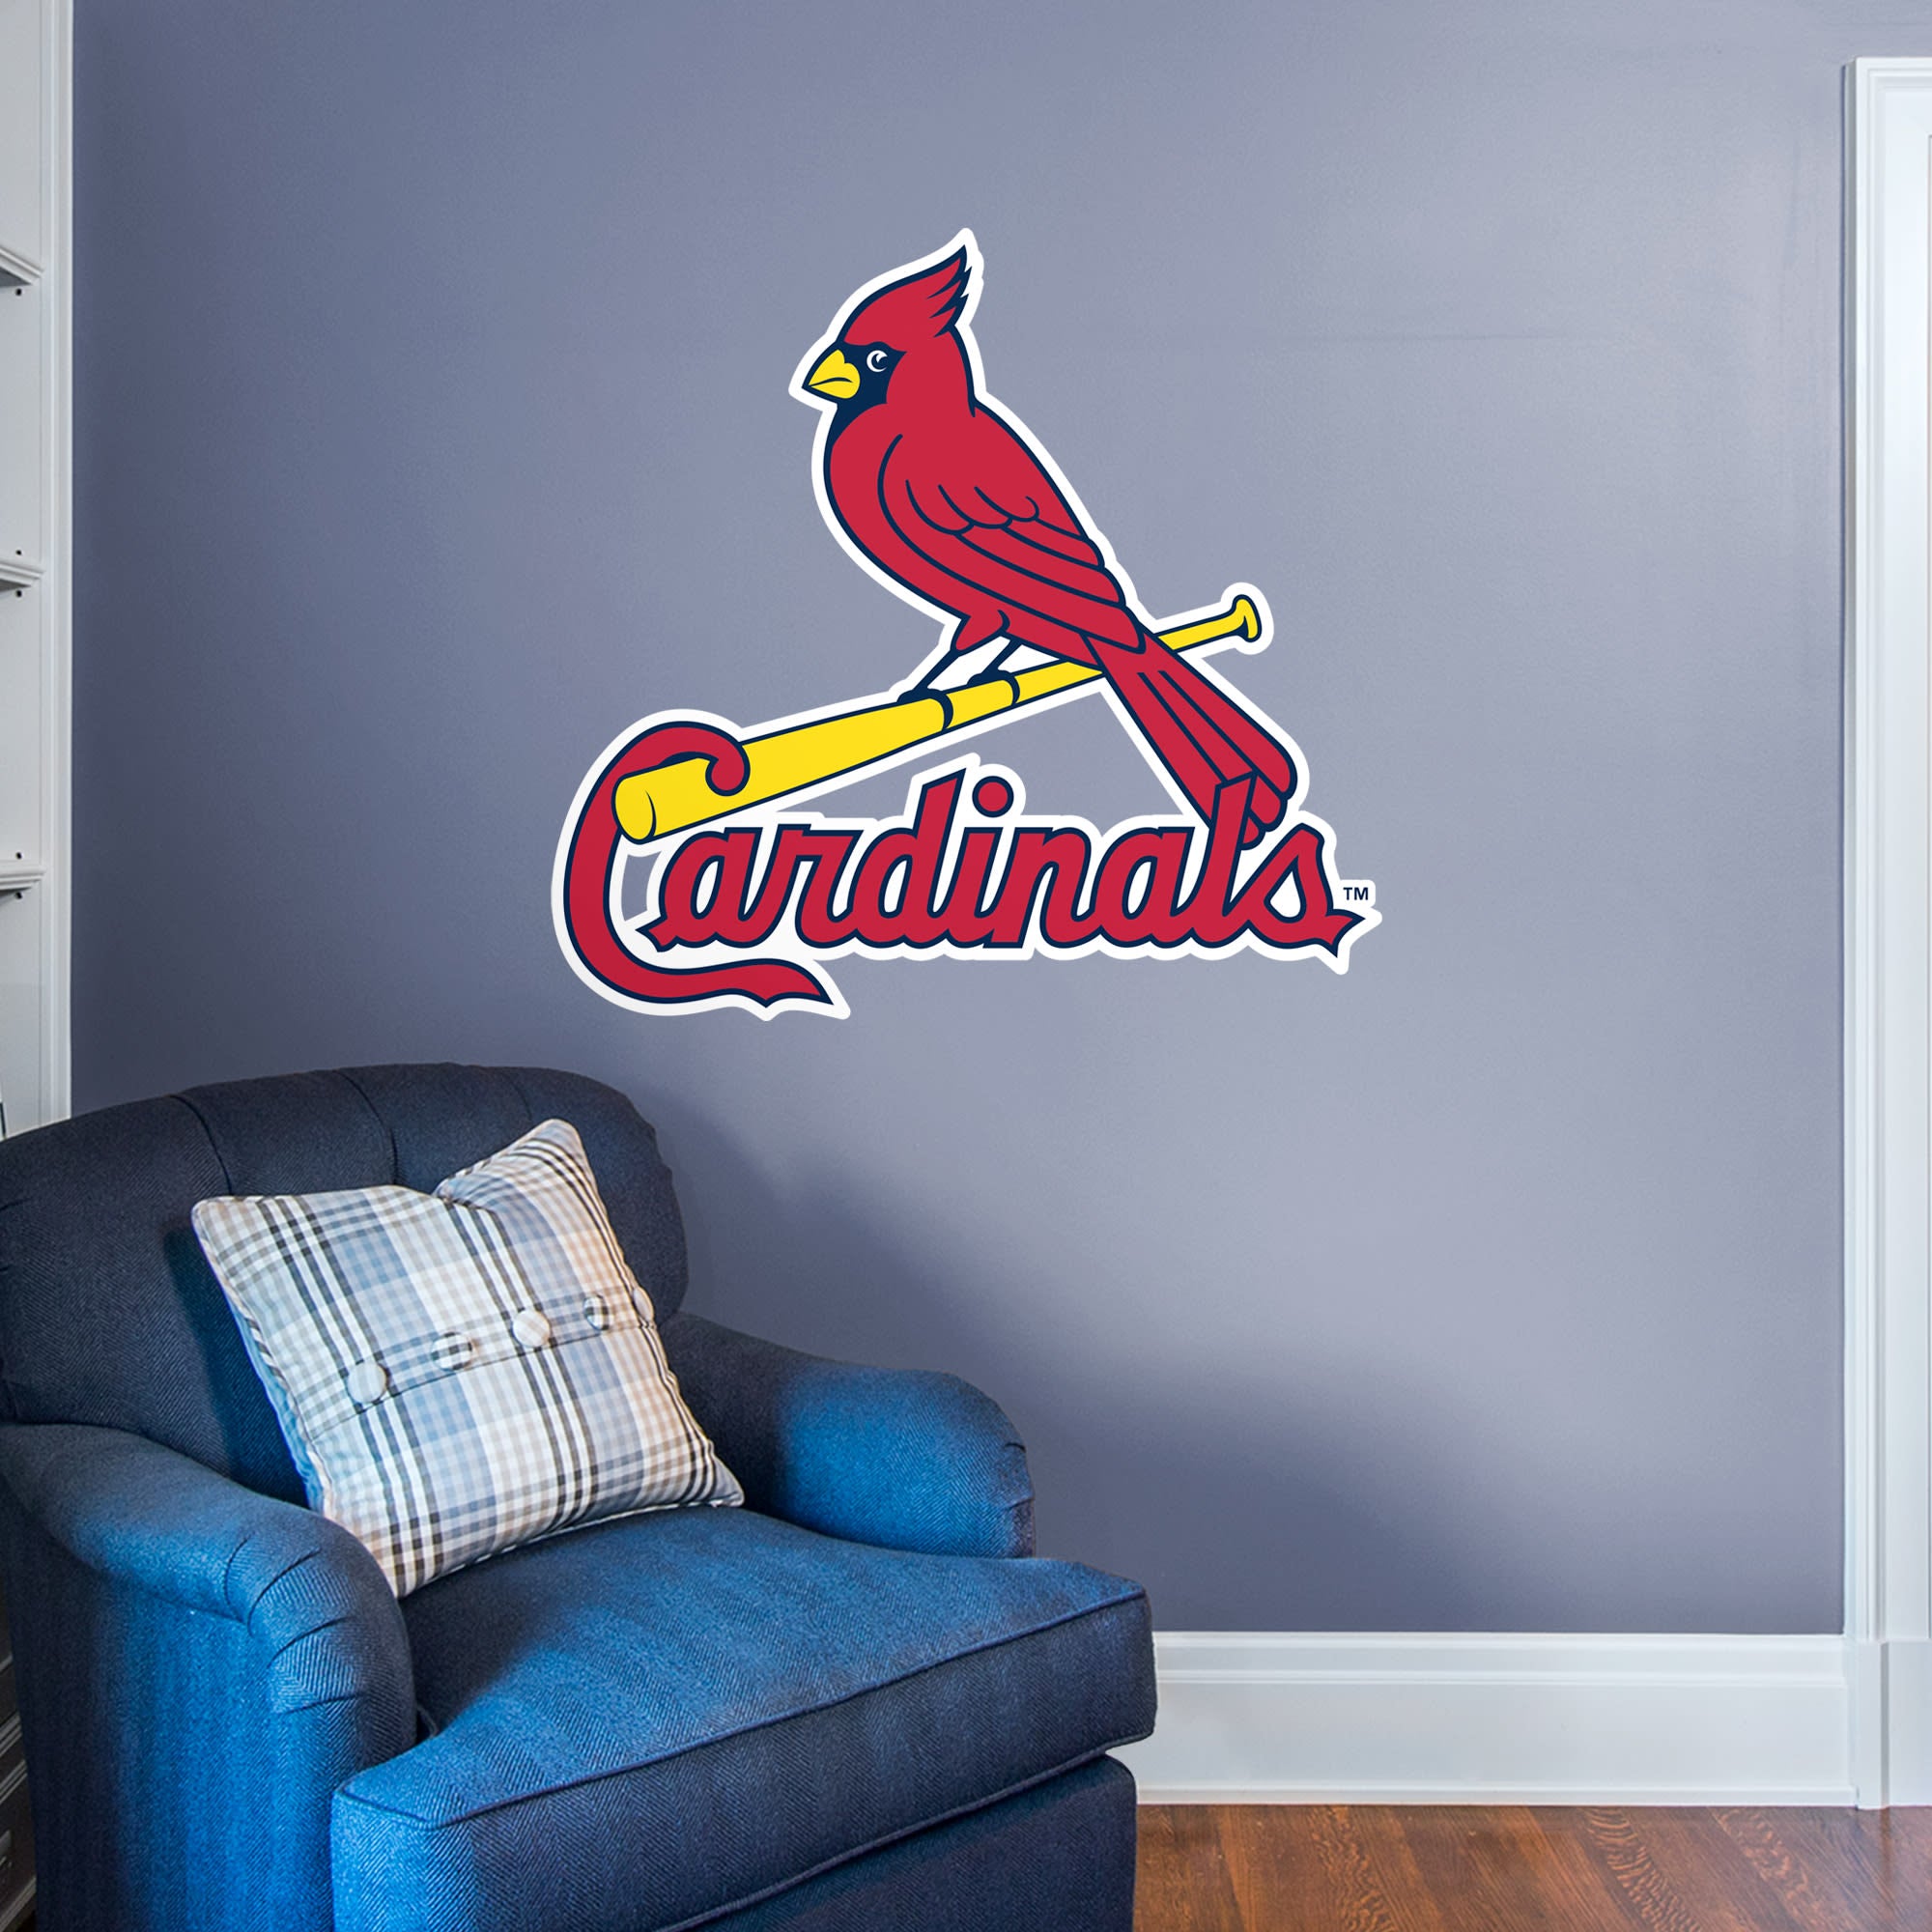 St. Louis Cardinals Banner and Tapestry Wall Tack Pads